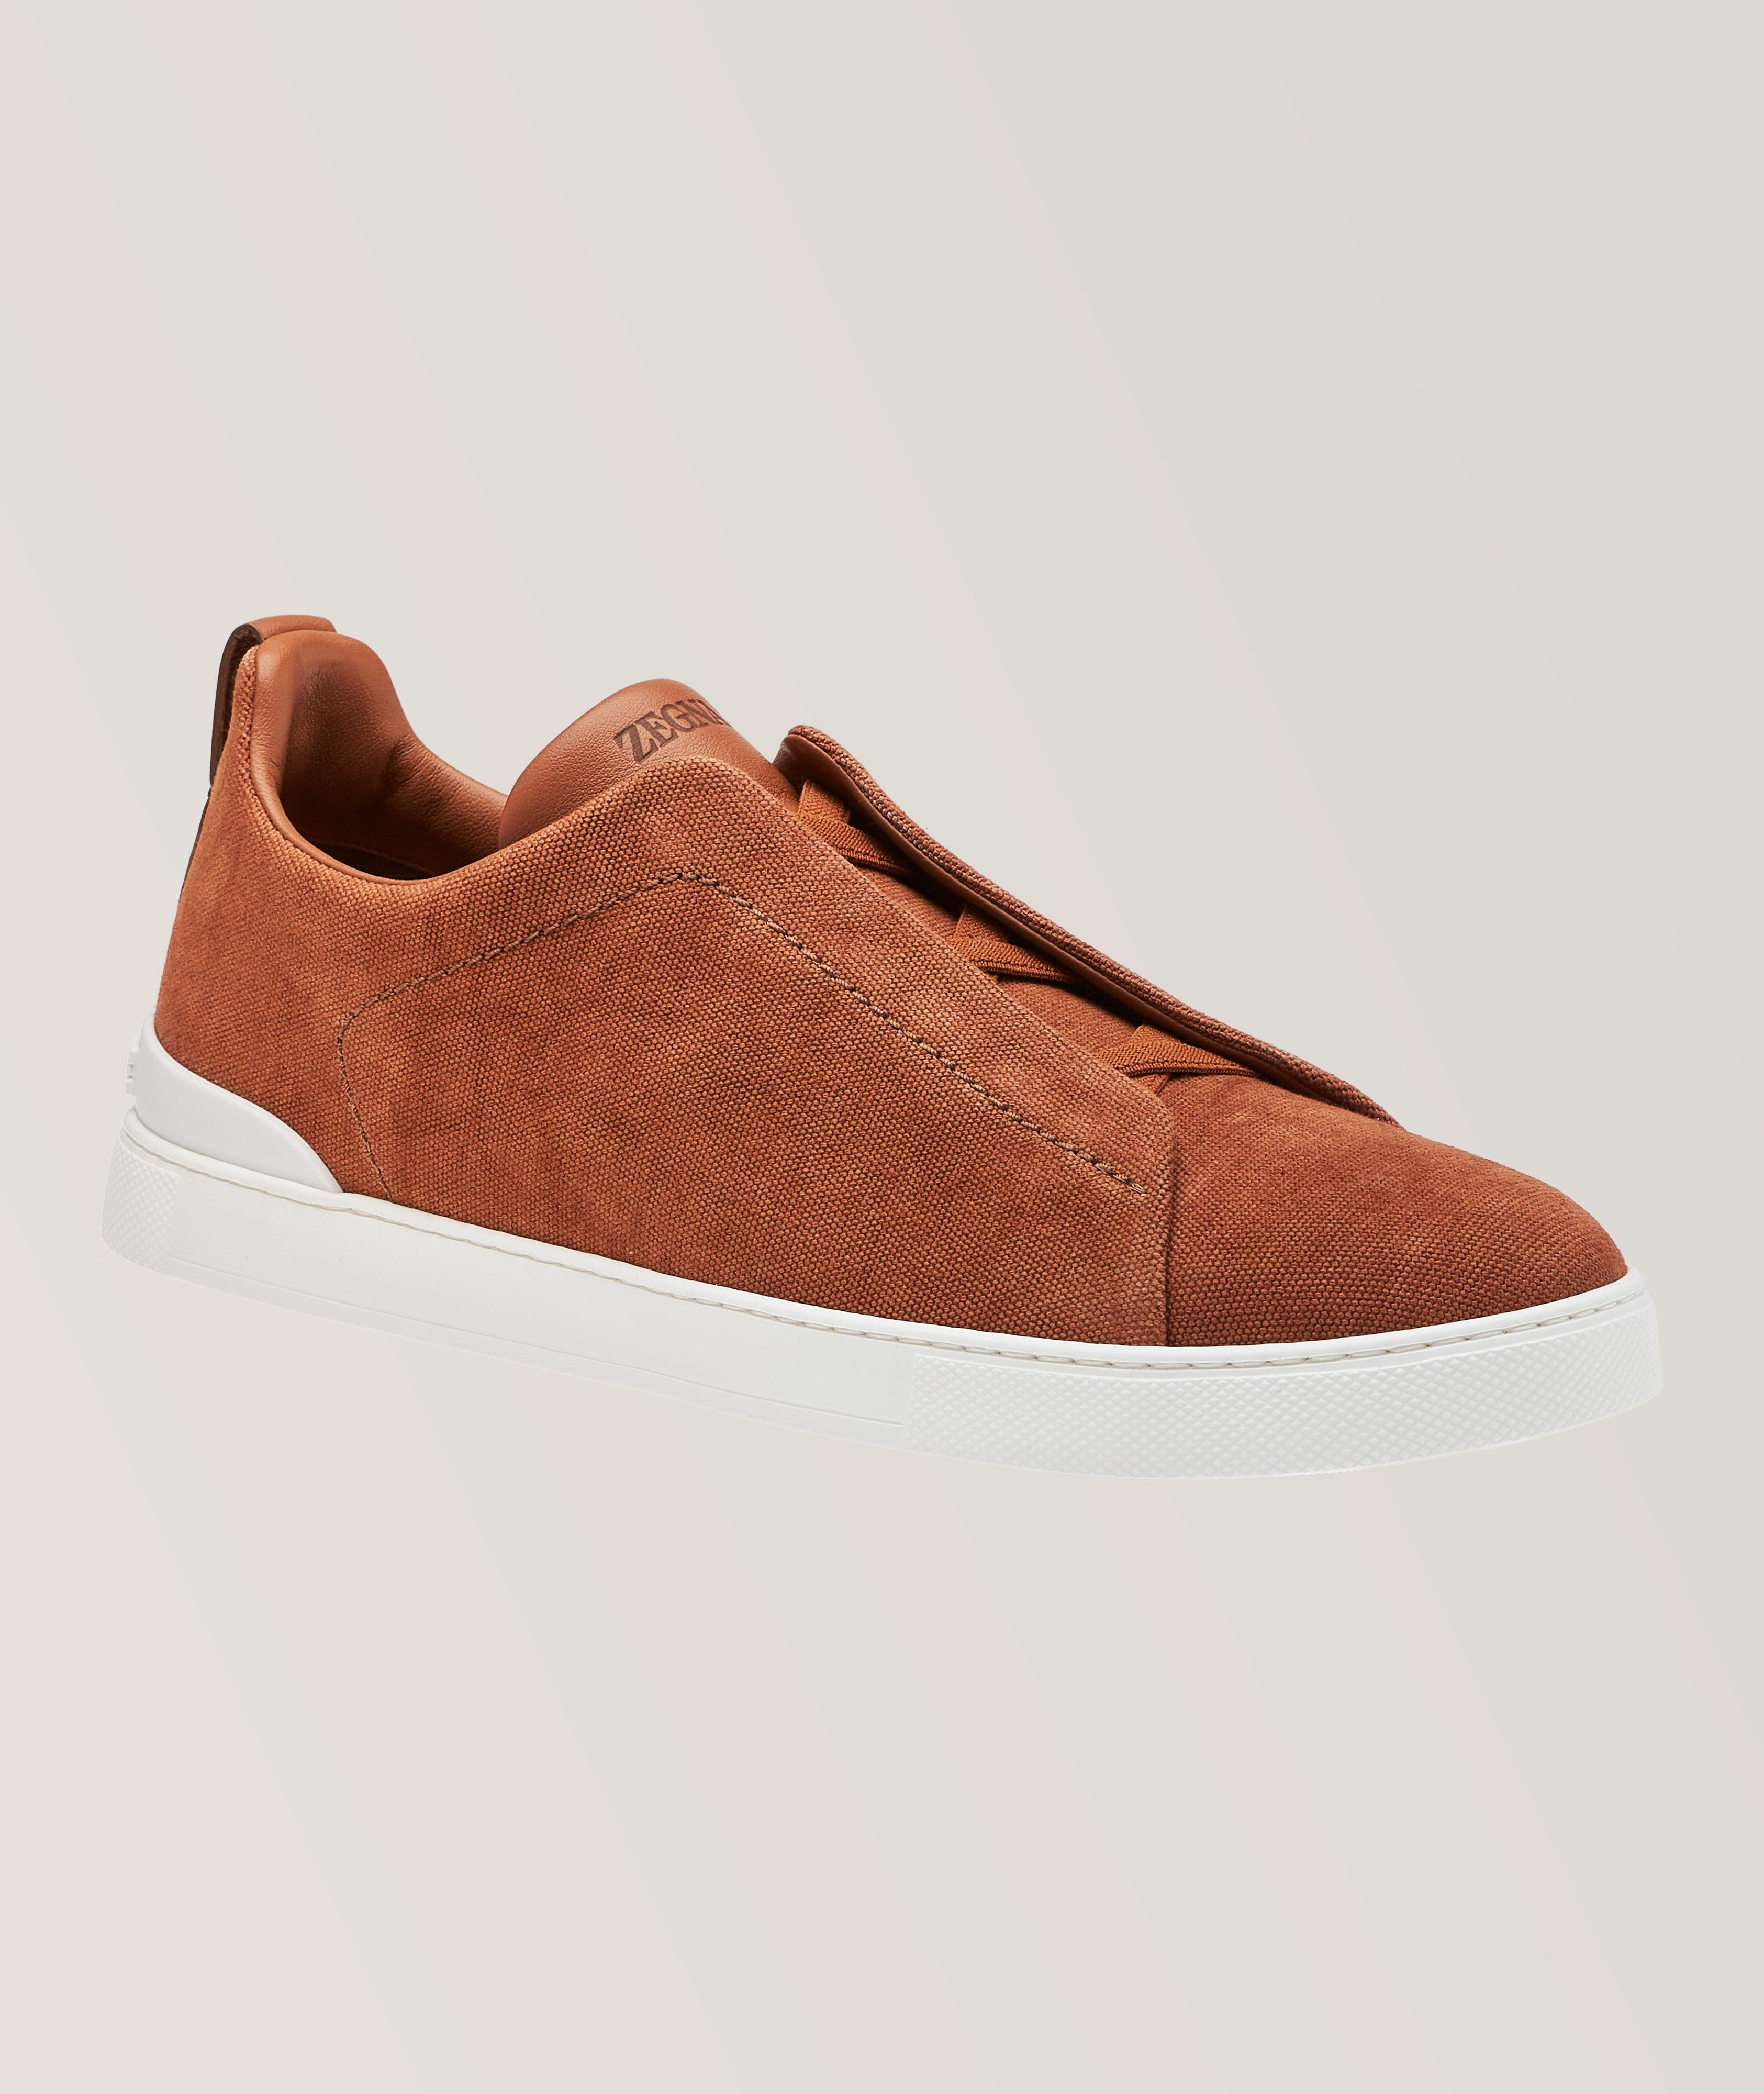 Zegna Canvas Triple Stitch Low Top Sneakers